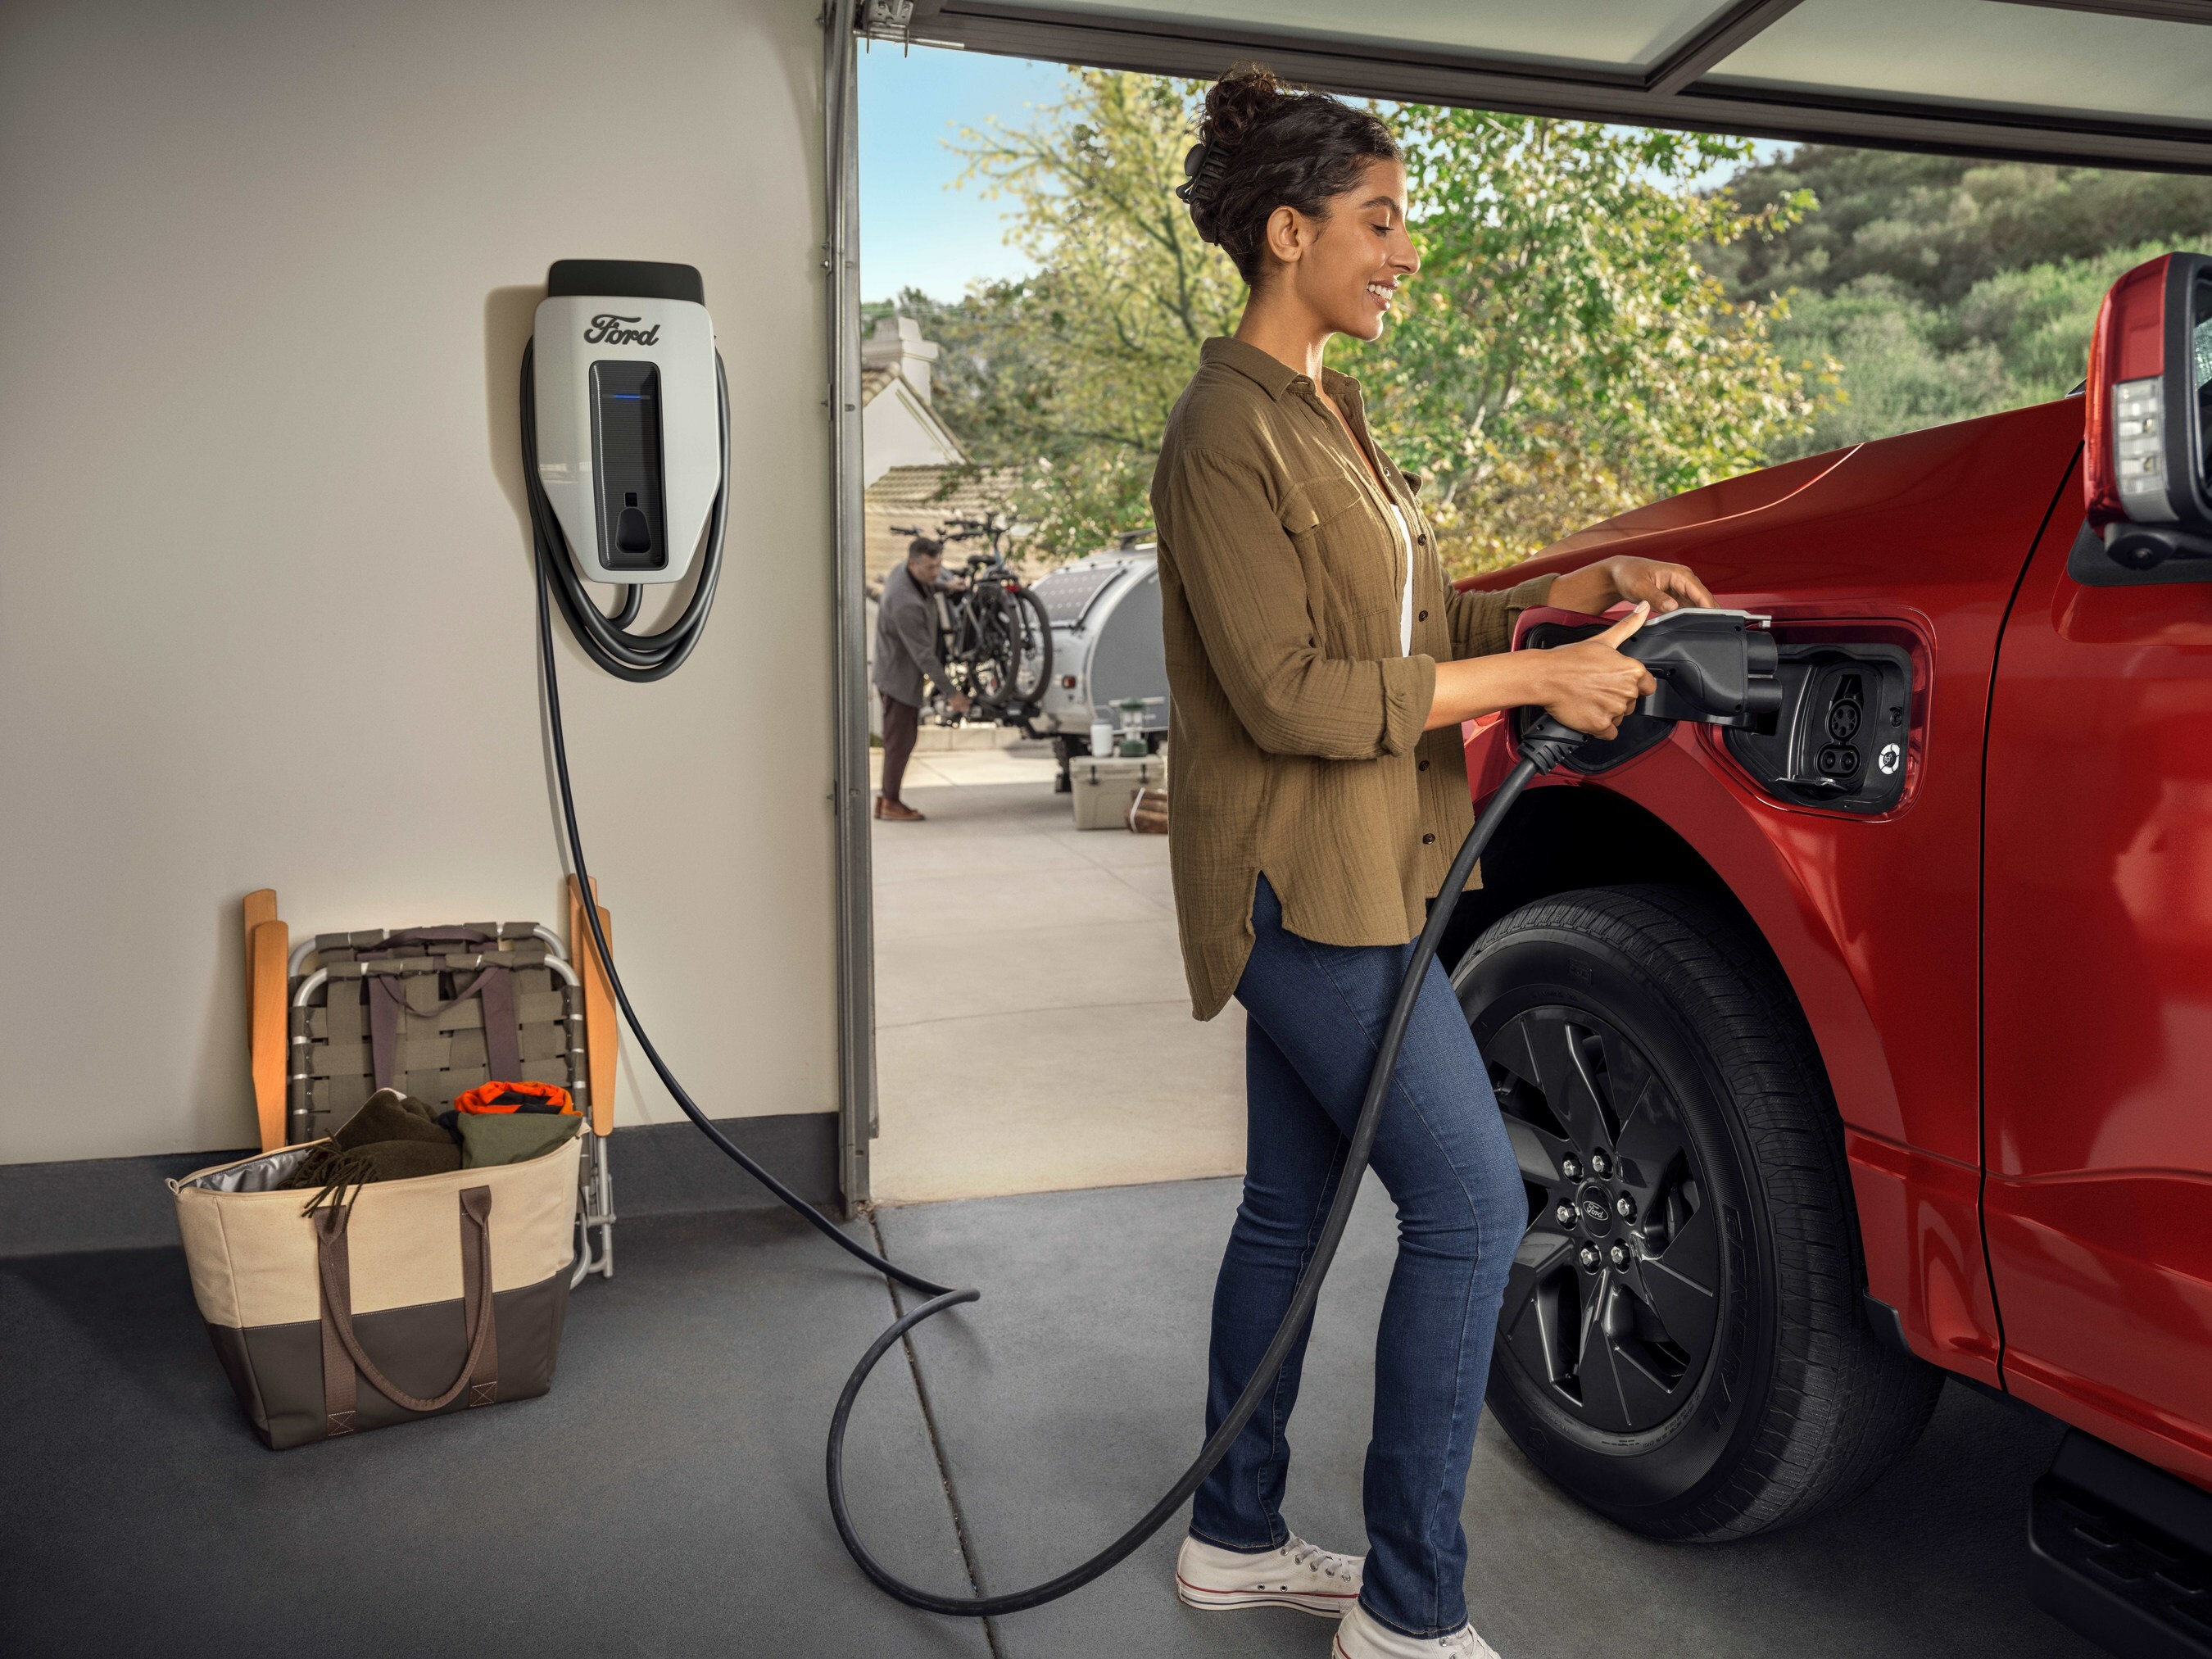 This first-of-its-kind collaboration between Ford and Resideo builds on Ford’s Intelligent Backup Power technology to explore customer benefits never before possible with gas-powered vehicles through pairing a smart electric vehicle (EV) directly with smart home solutions.